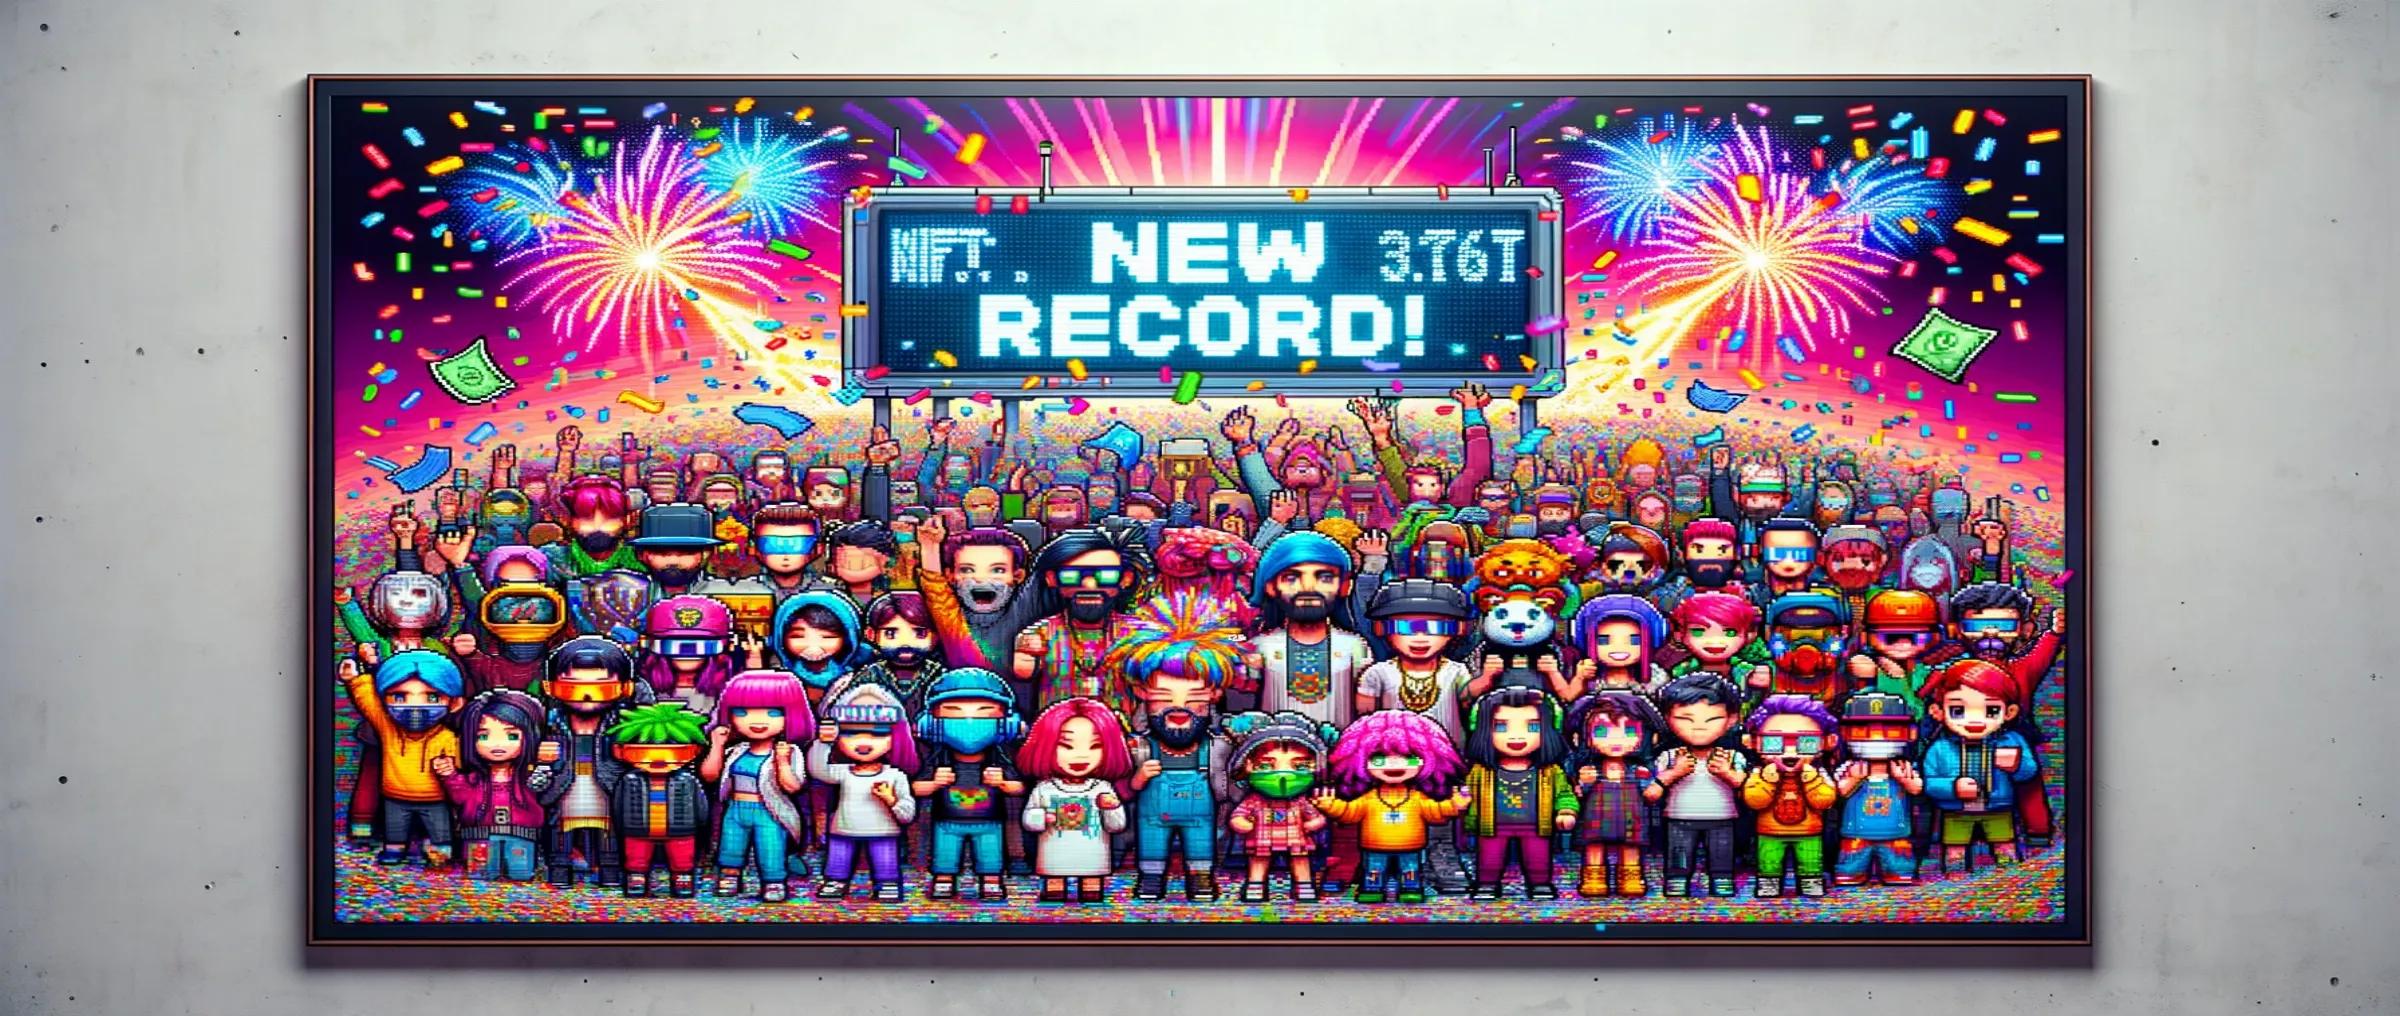 The CryptoPunks collection has set a new record for sales among NFT